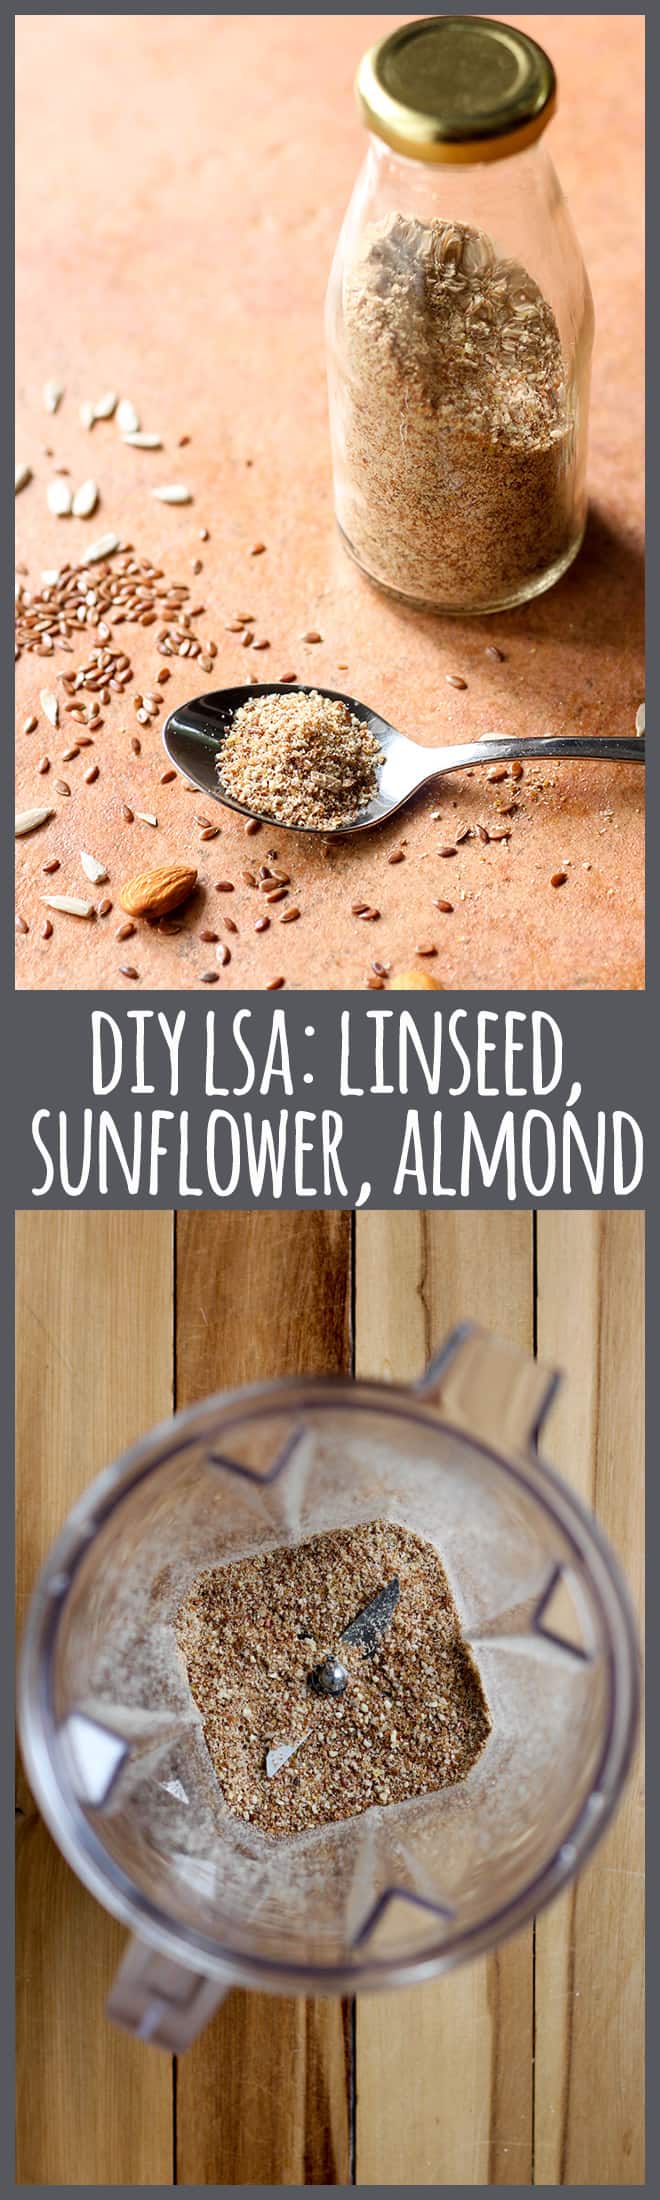 DIY LSA: Ground linseed (flaxseed), sunflower seeds and almonds. A great source of omega fatty acids, and incredibly easy to make at home. 